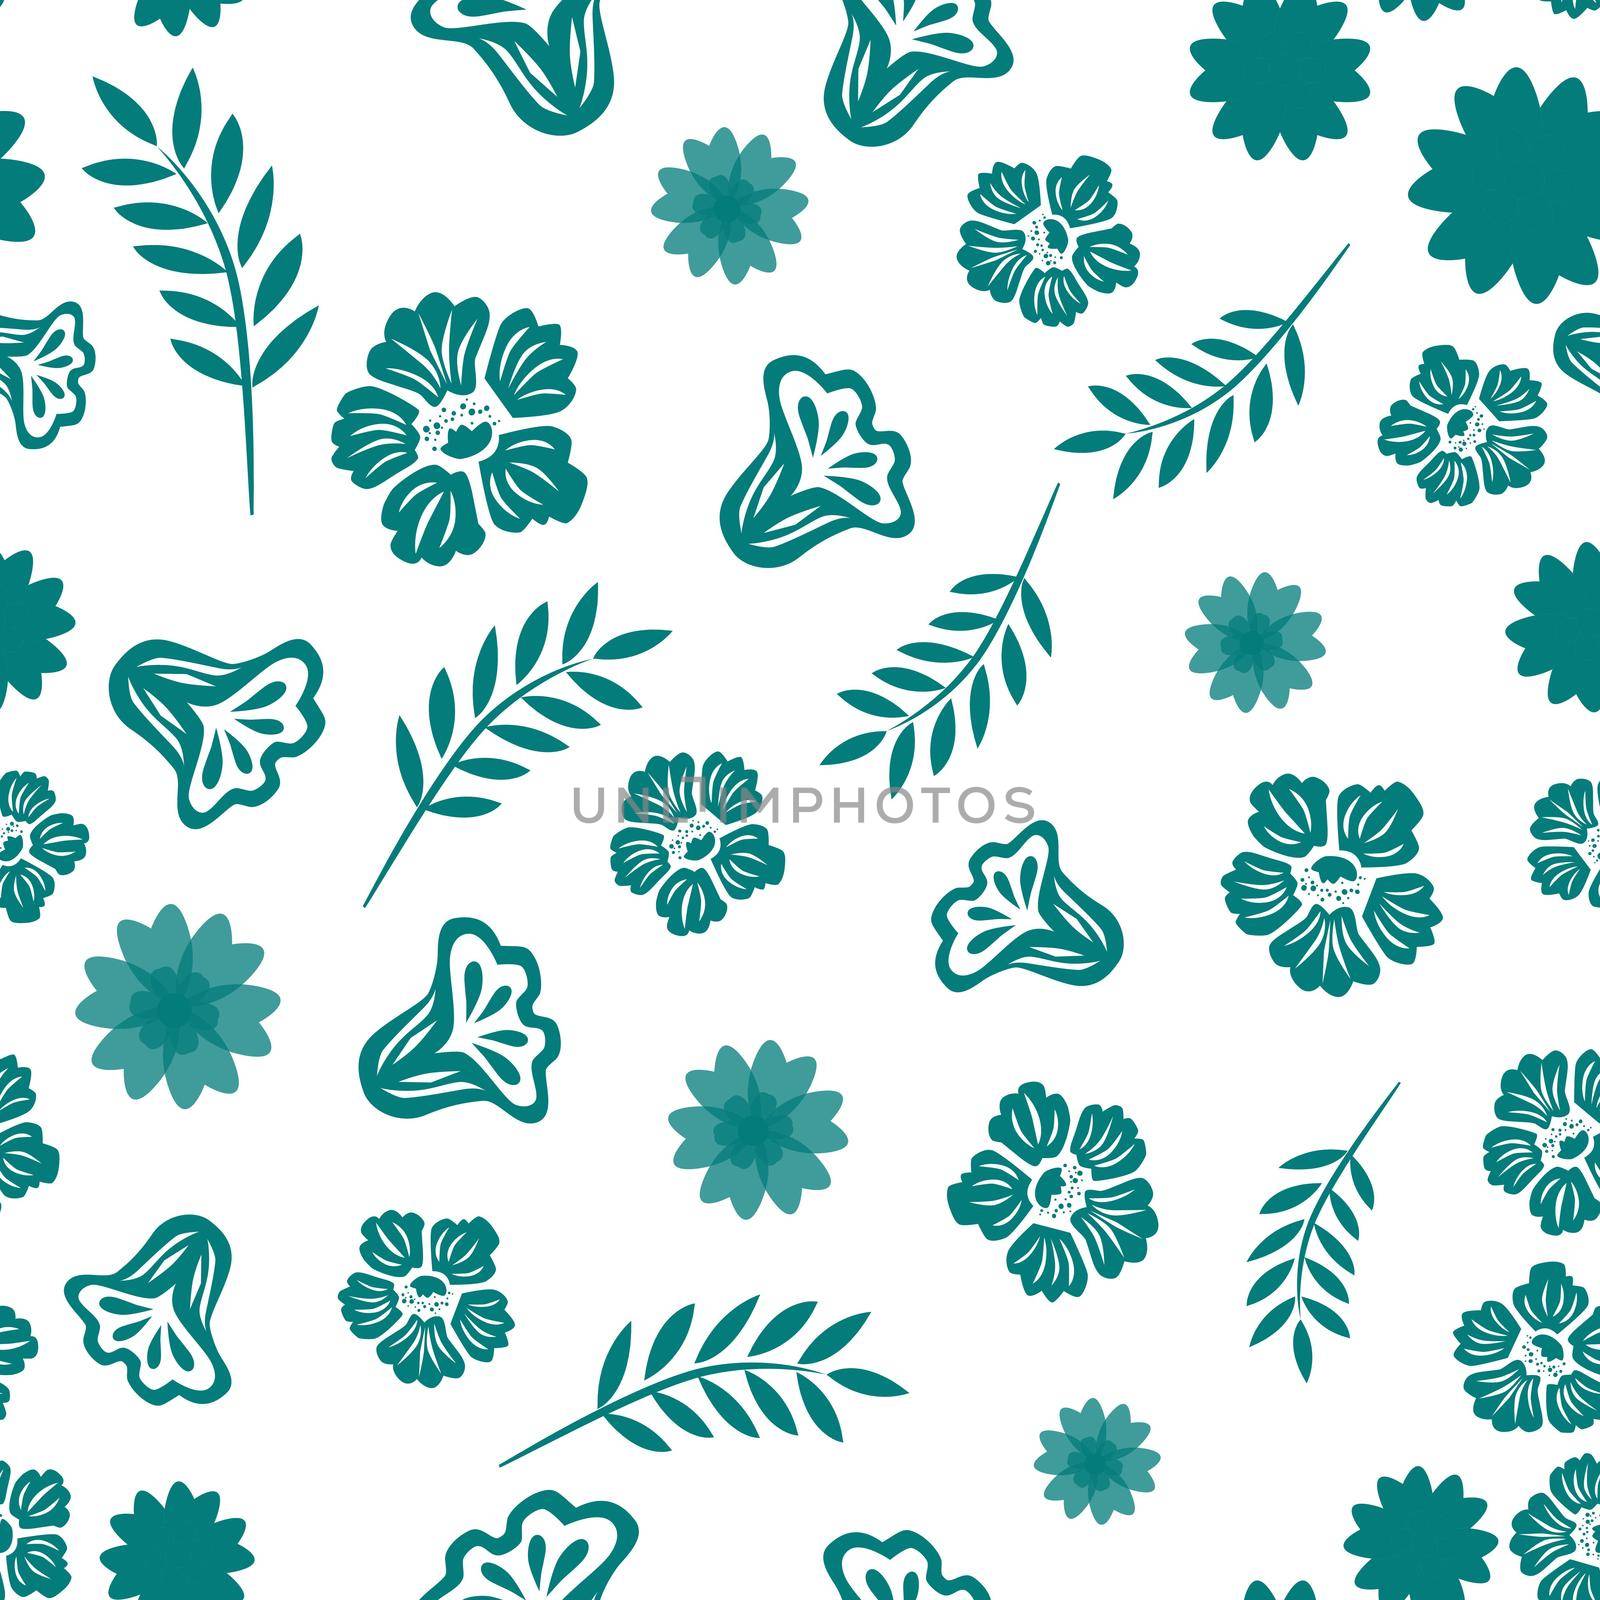 Seamless pattern from abstract flowers and elements on a white background.Vector illustration